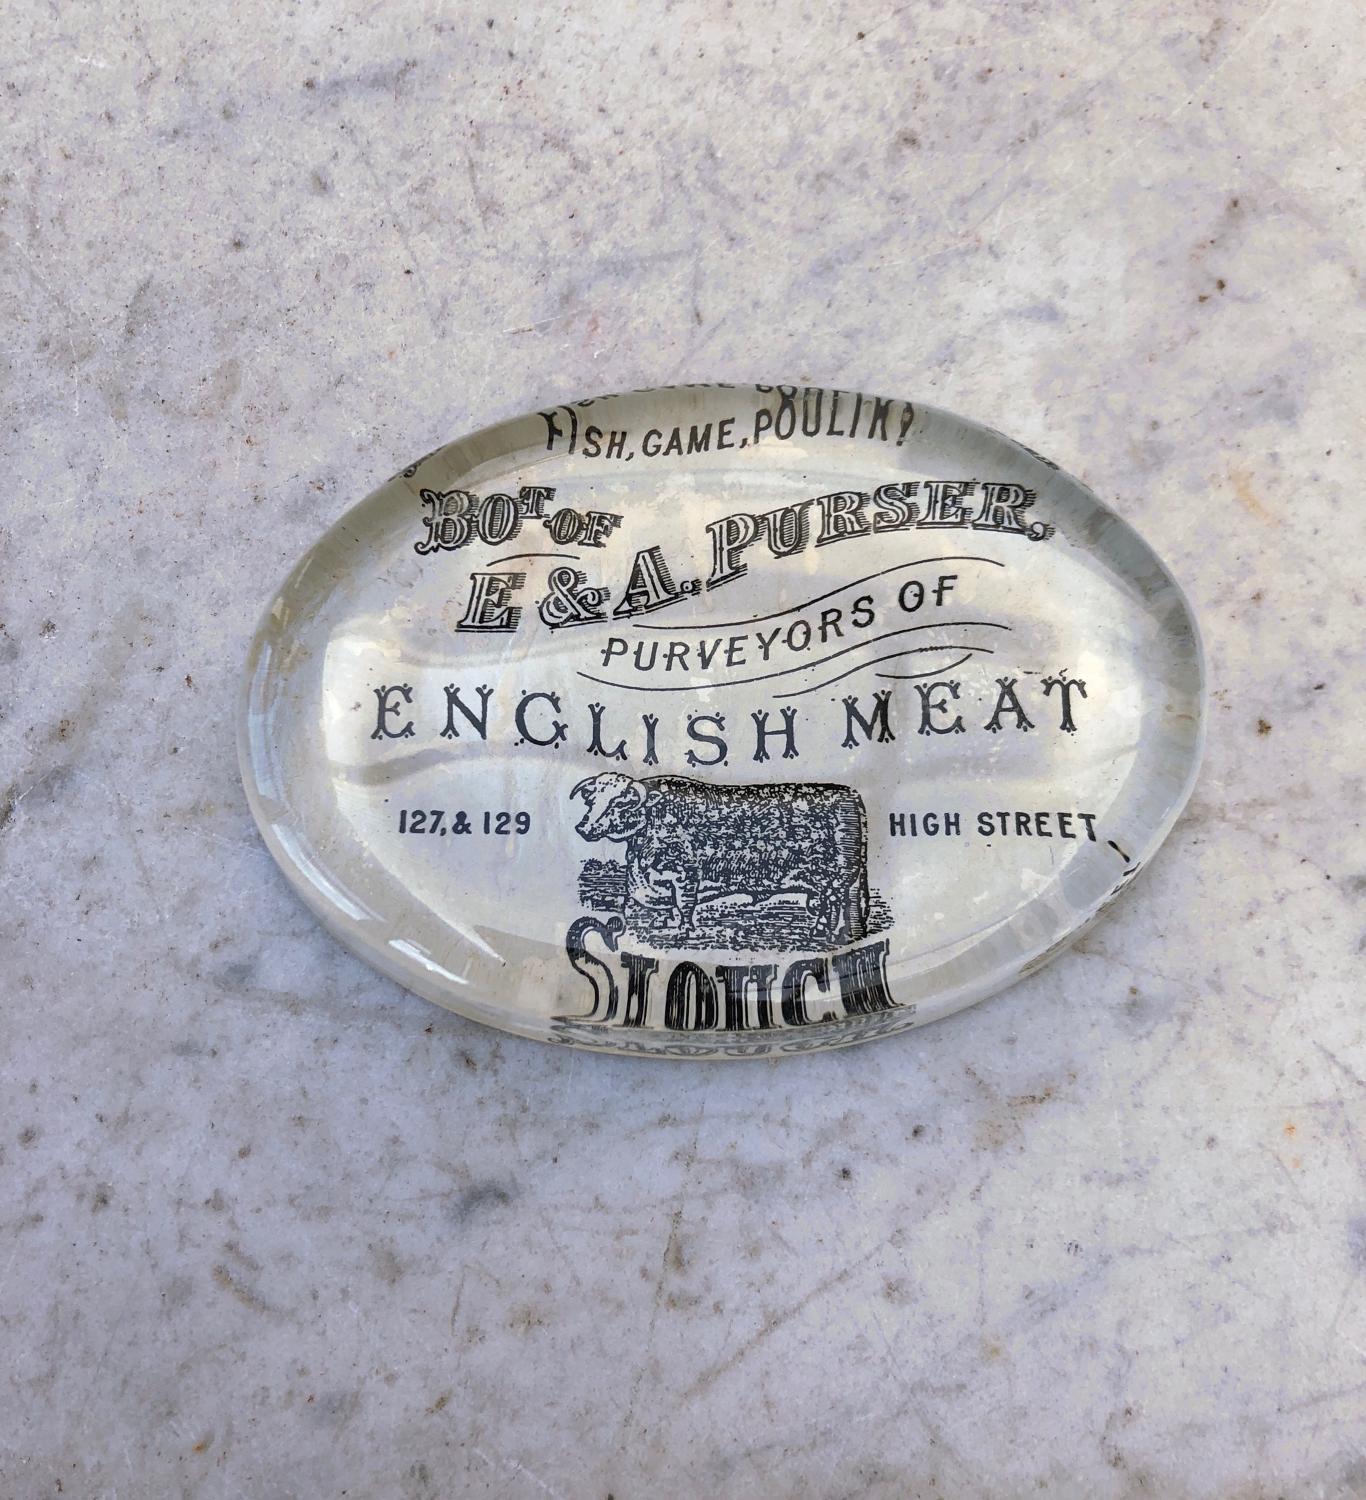 Antique Glass Paperweight - E A Purser Purveyors of English Meat